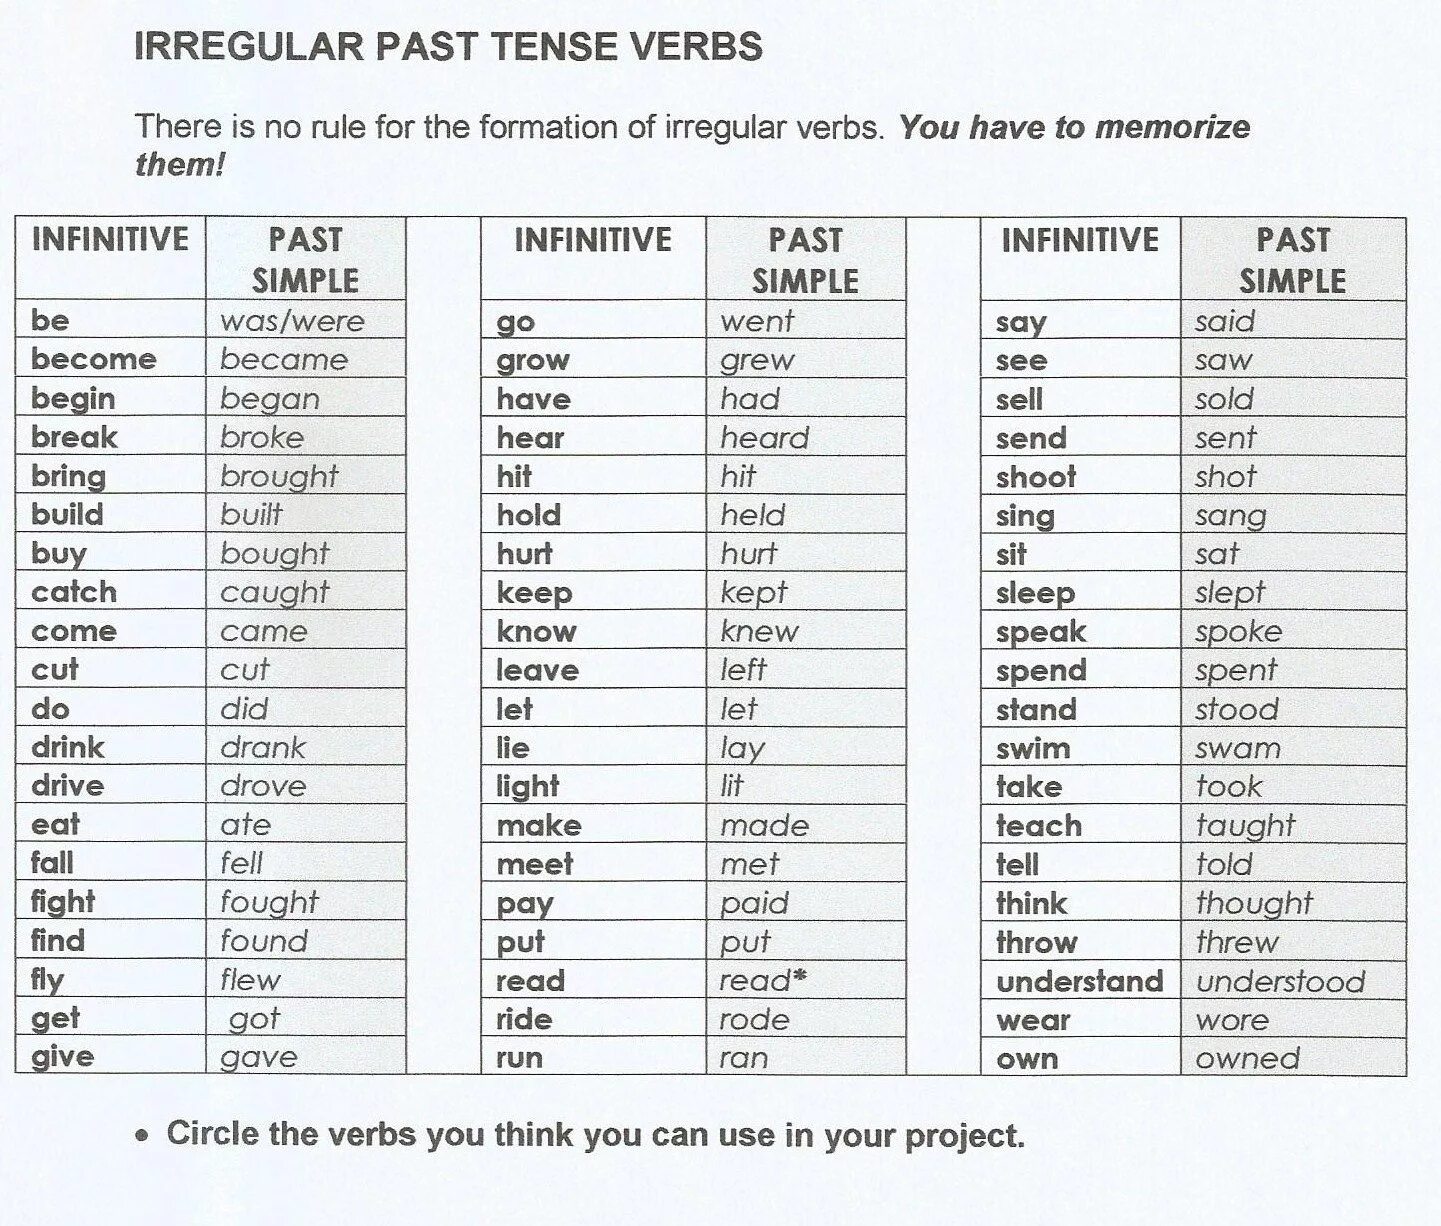 When would you like to come. Паст Симпл Irregular verbs. Паст Симпл Вербс. Past simple форма глагола. Past simple 2 форма глагола.